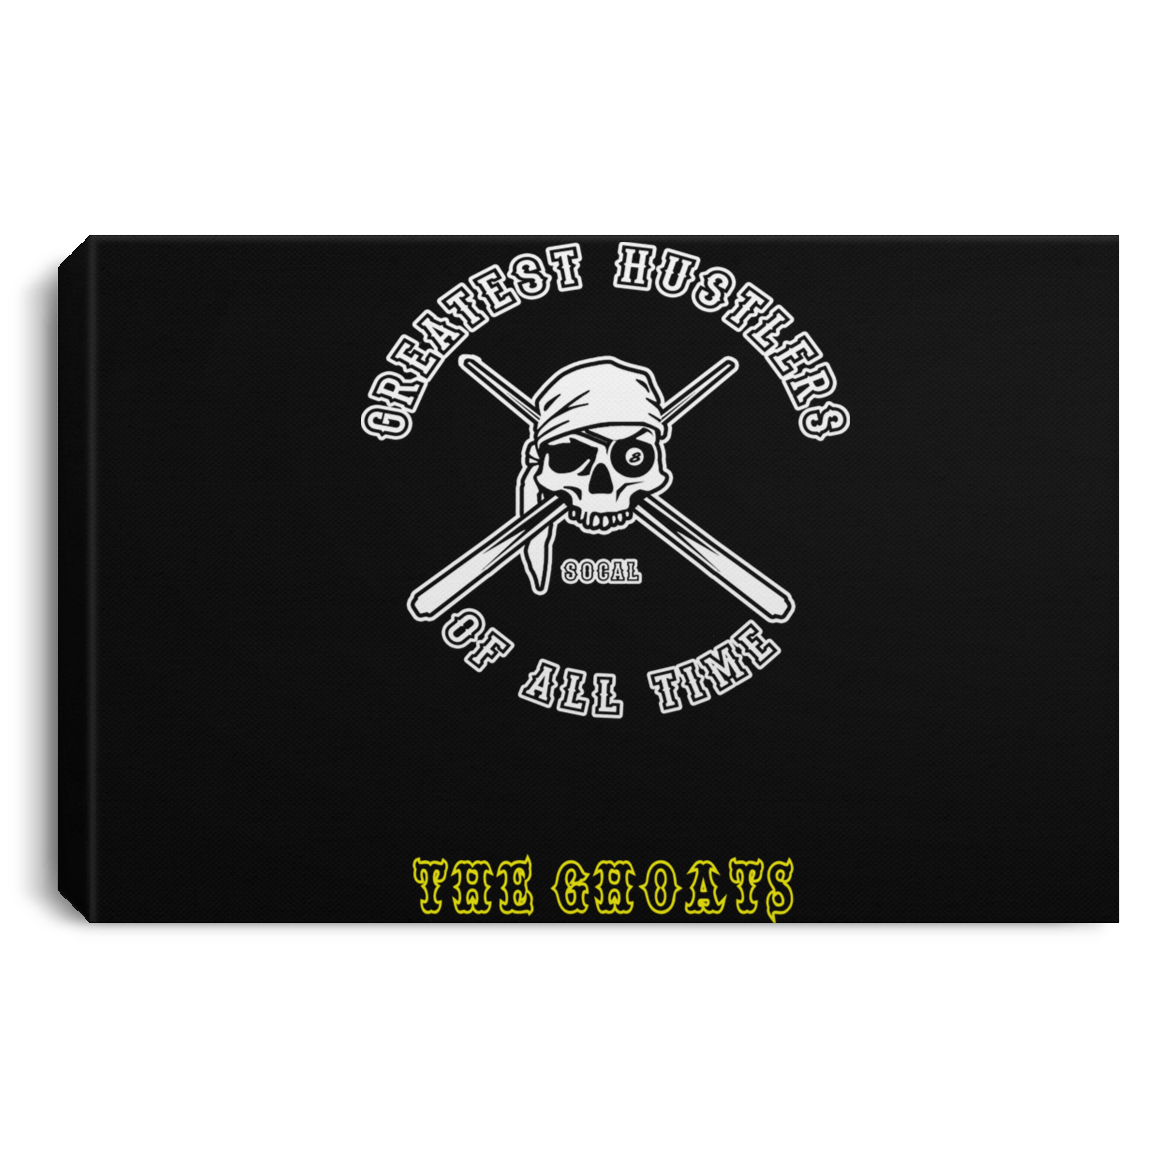 The GHOATS Custom Design. #4 Motorcycle Club Style. Ver 1/2. Landscape Canvas .75in Frame